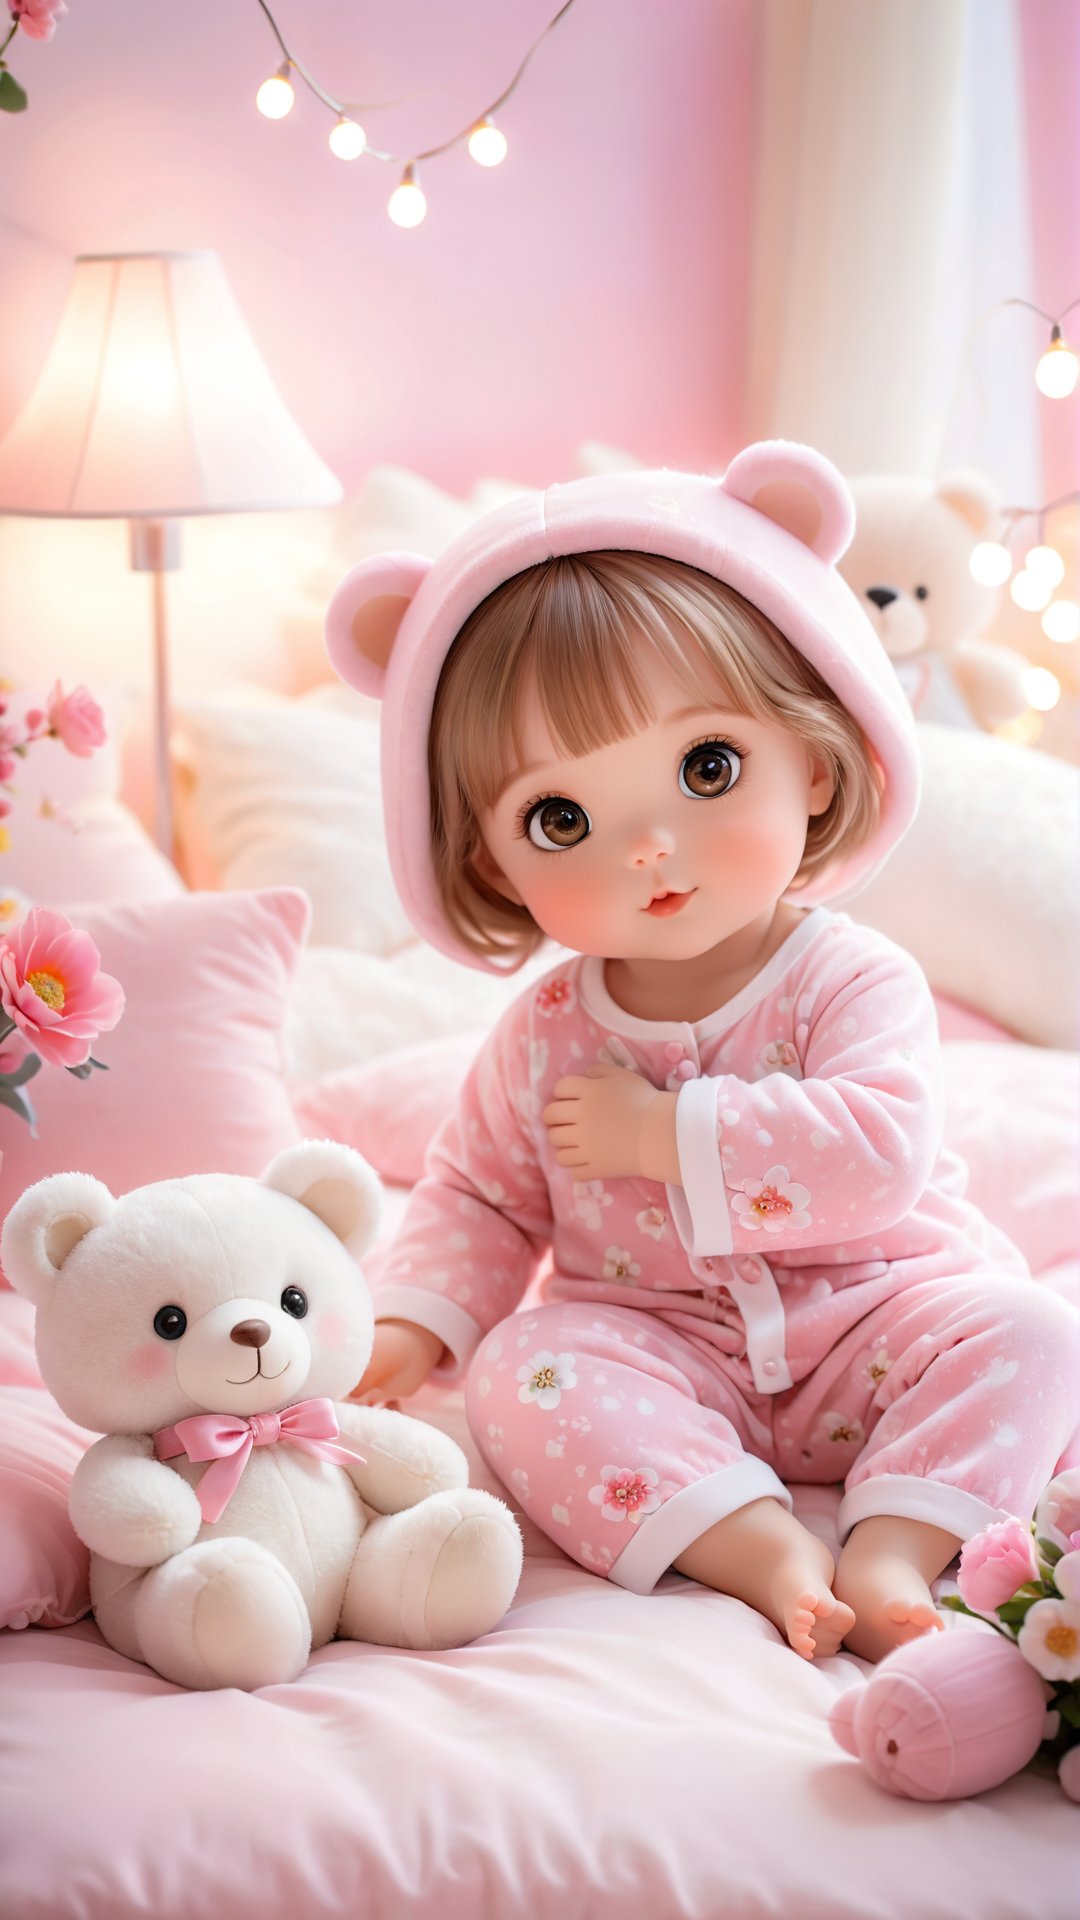 Flowers bloom, A 6 year old beautiful adorable little baby girl, big beautiful charming eyes, wearing pink and white pajamas hug a cute small fuzzy bear toy lying in the soft bed, lamps lighting soft, so sweet and playful and enjoy, charming.lovely portrait photography, flowers bloom bokeh background, depth of field.